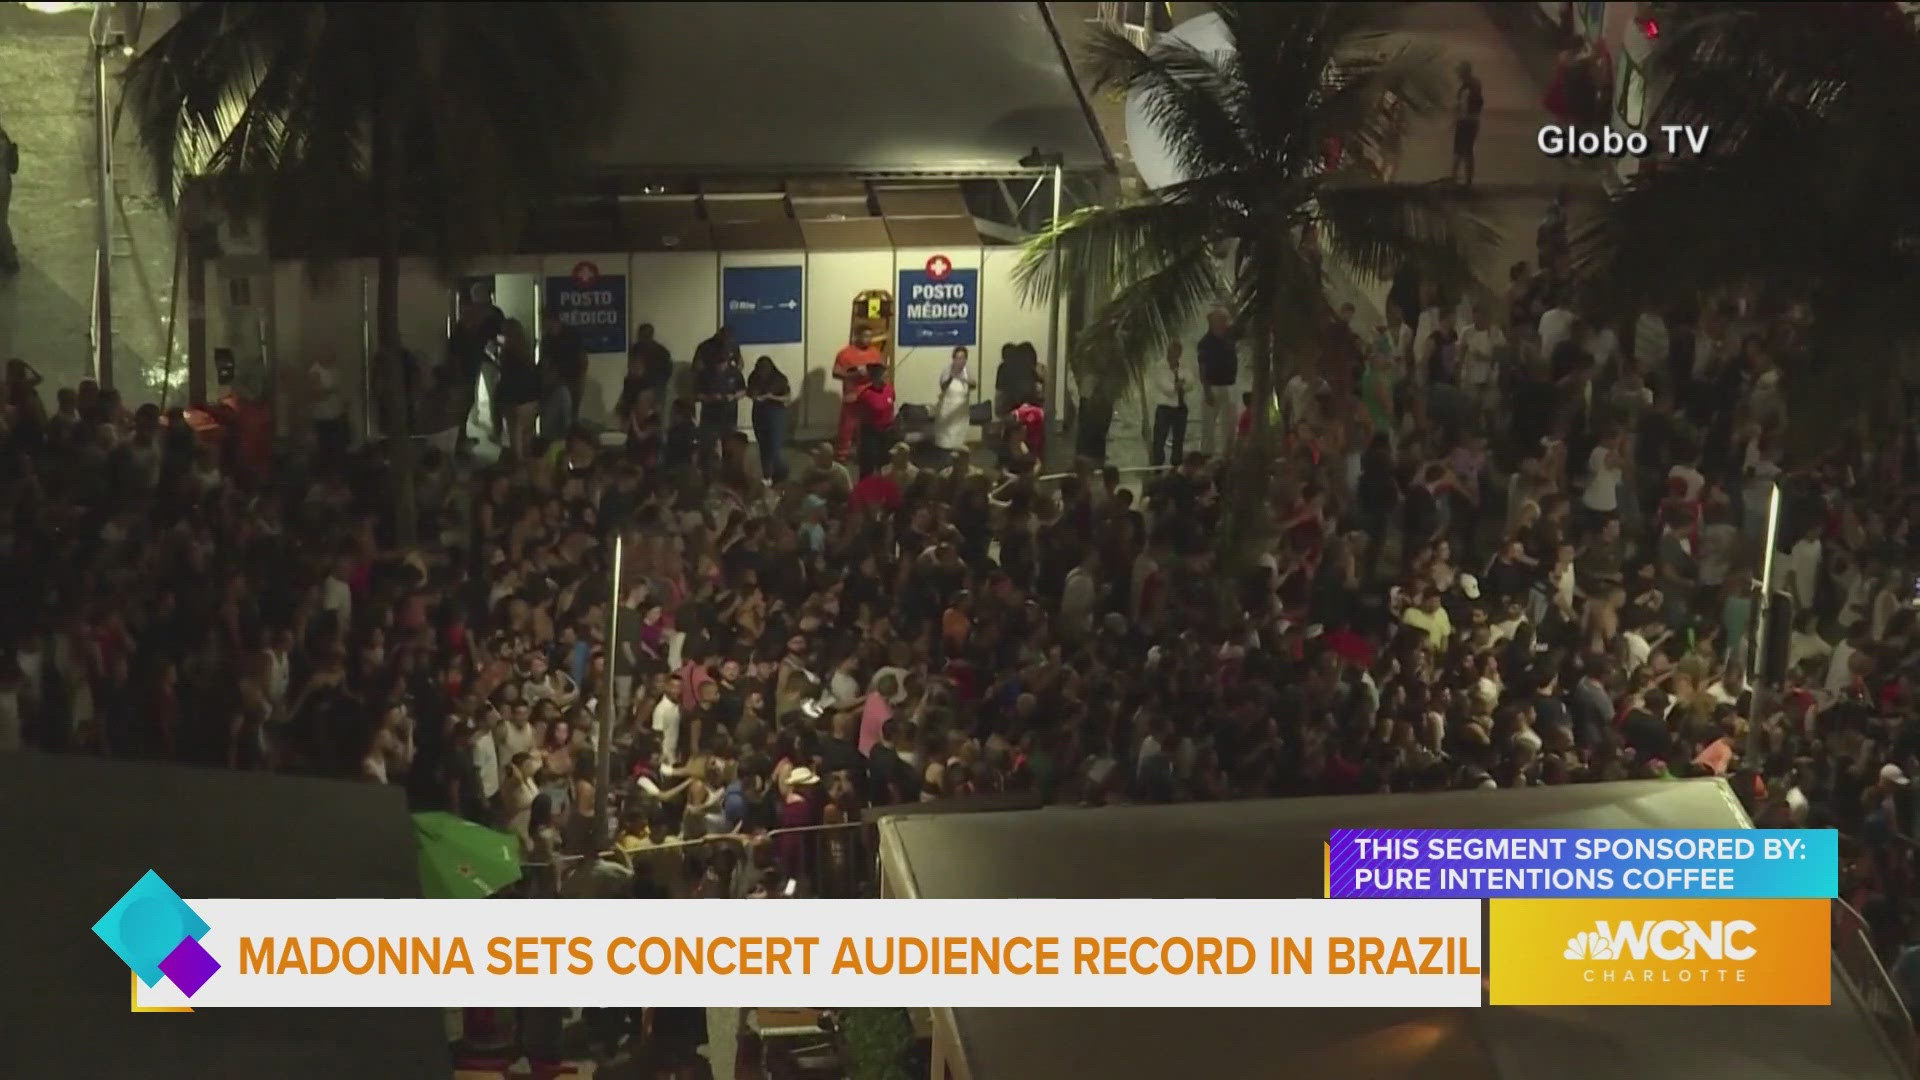 Madonna sets a concert audience record in Brazil